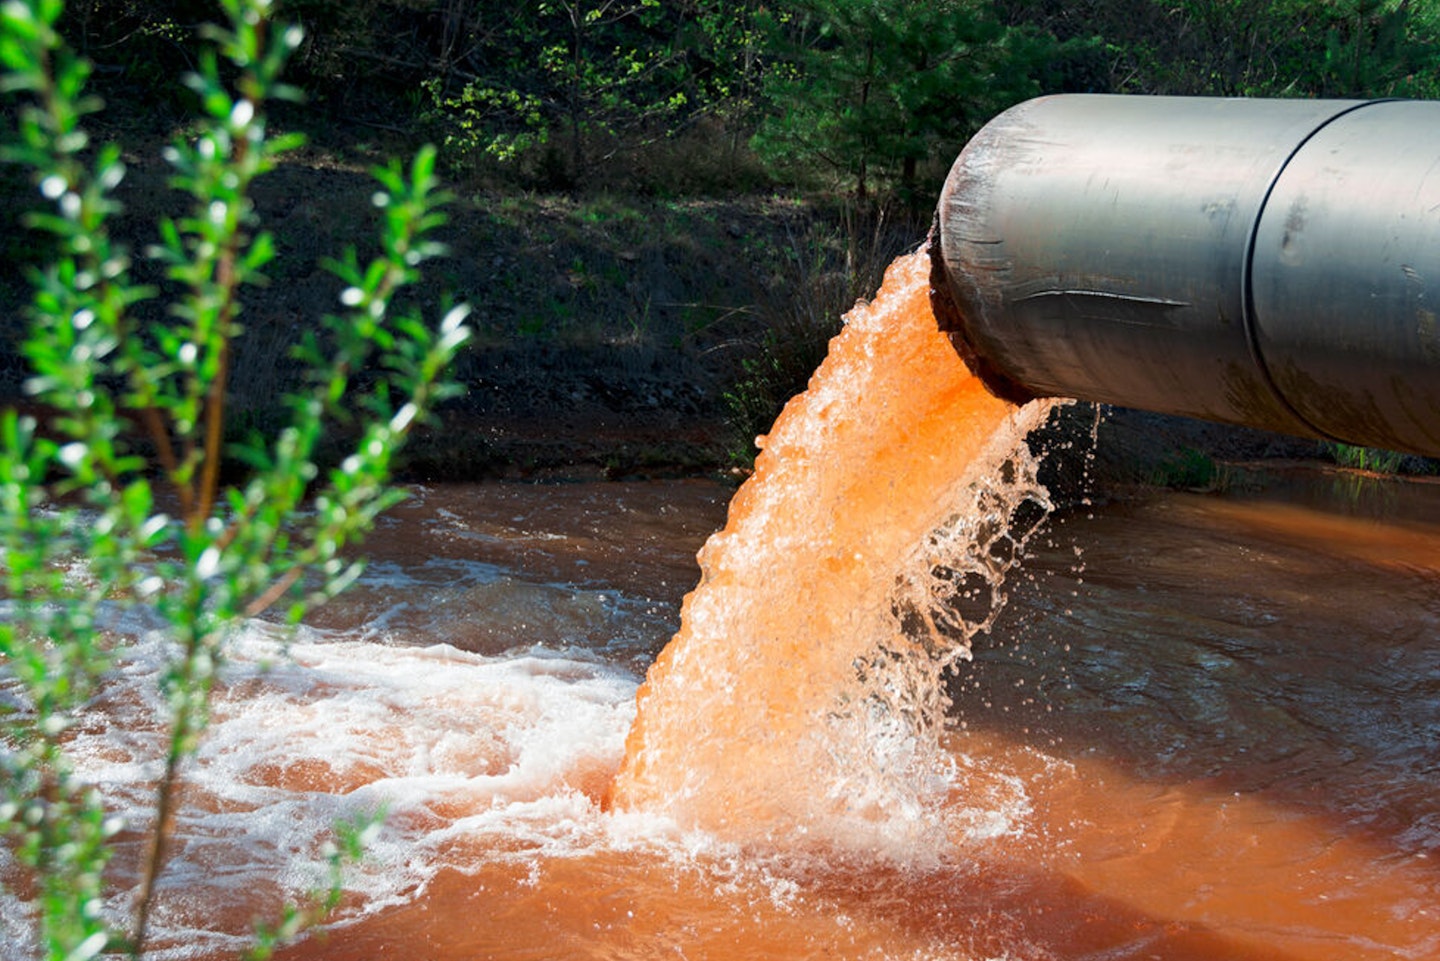 The RPS allows them to discharge effluent without meeting the conditions of their permits